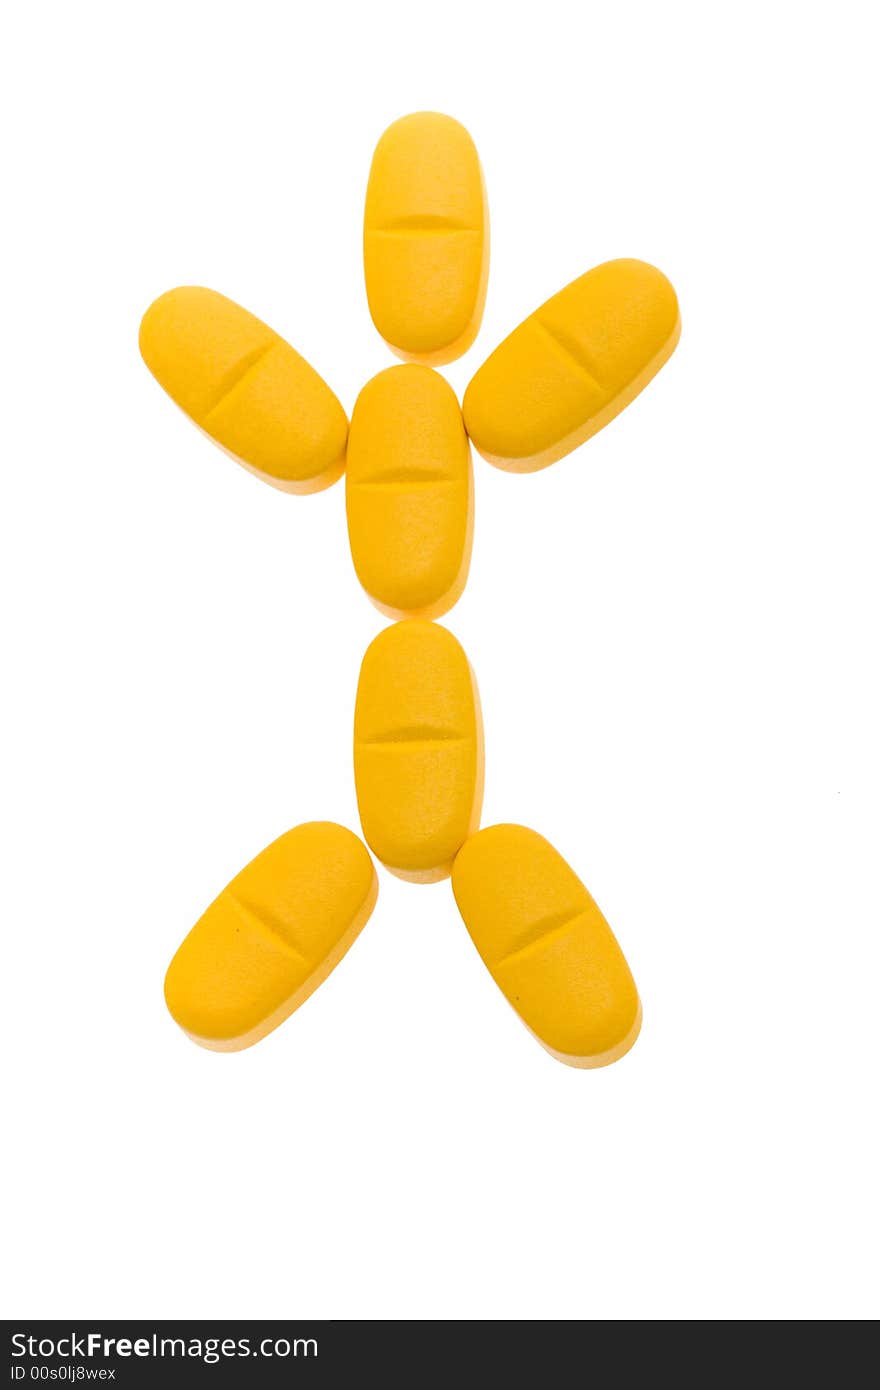 Man silhouette made from orange pills. Symbol of recovery. Isolated on white